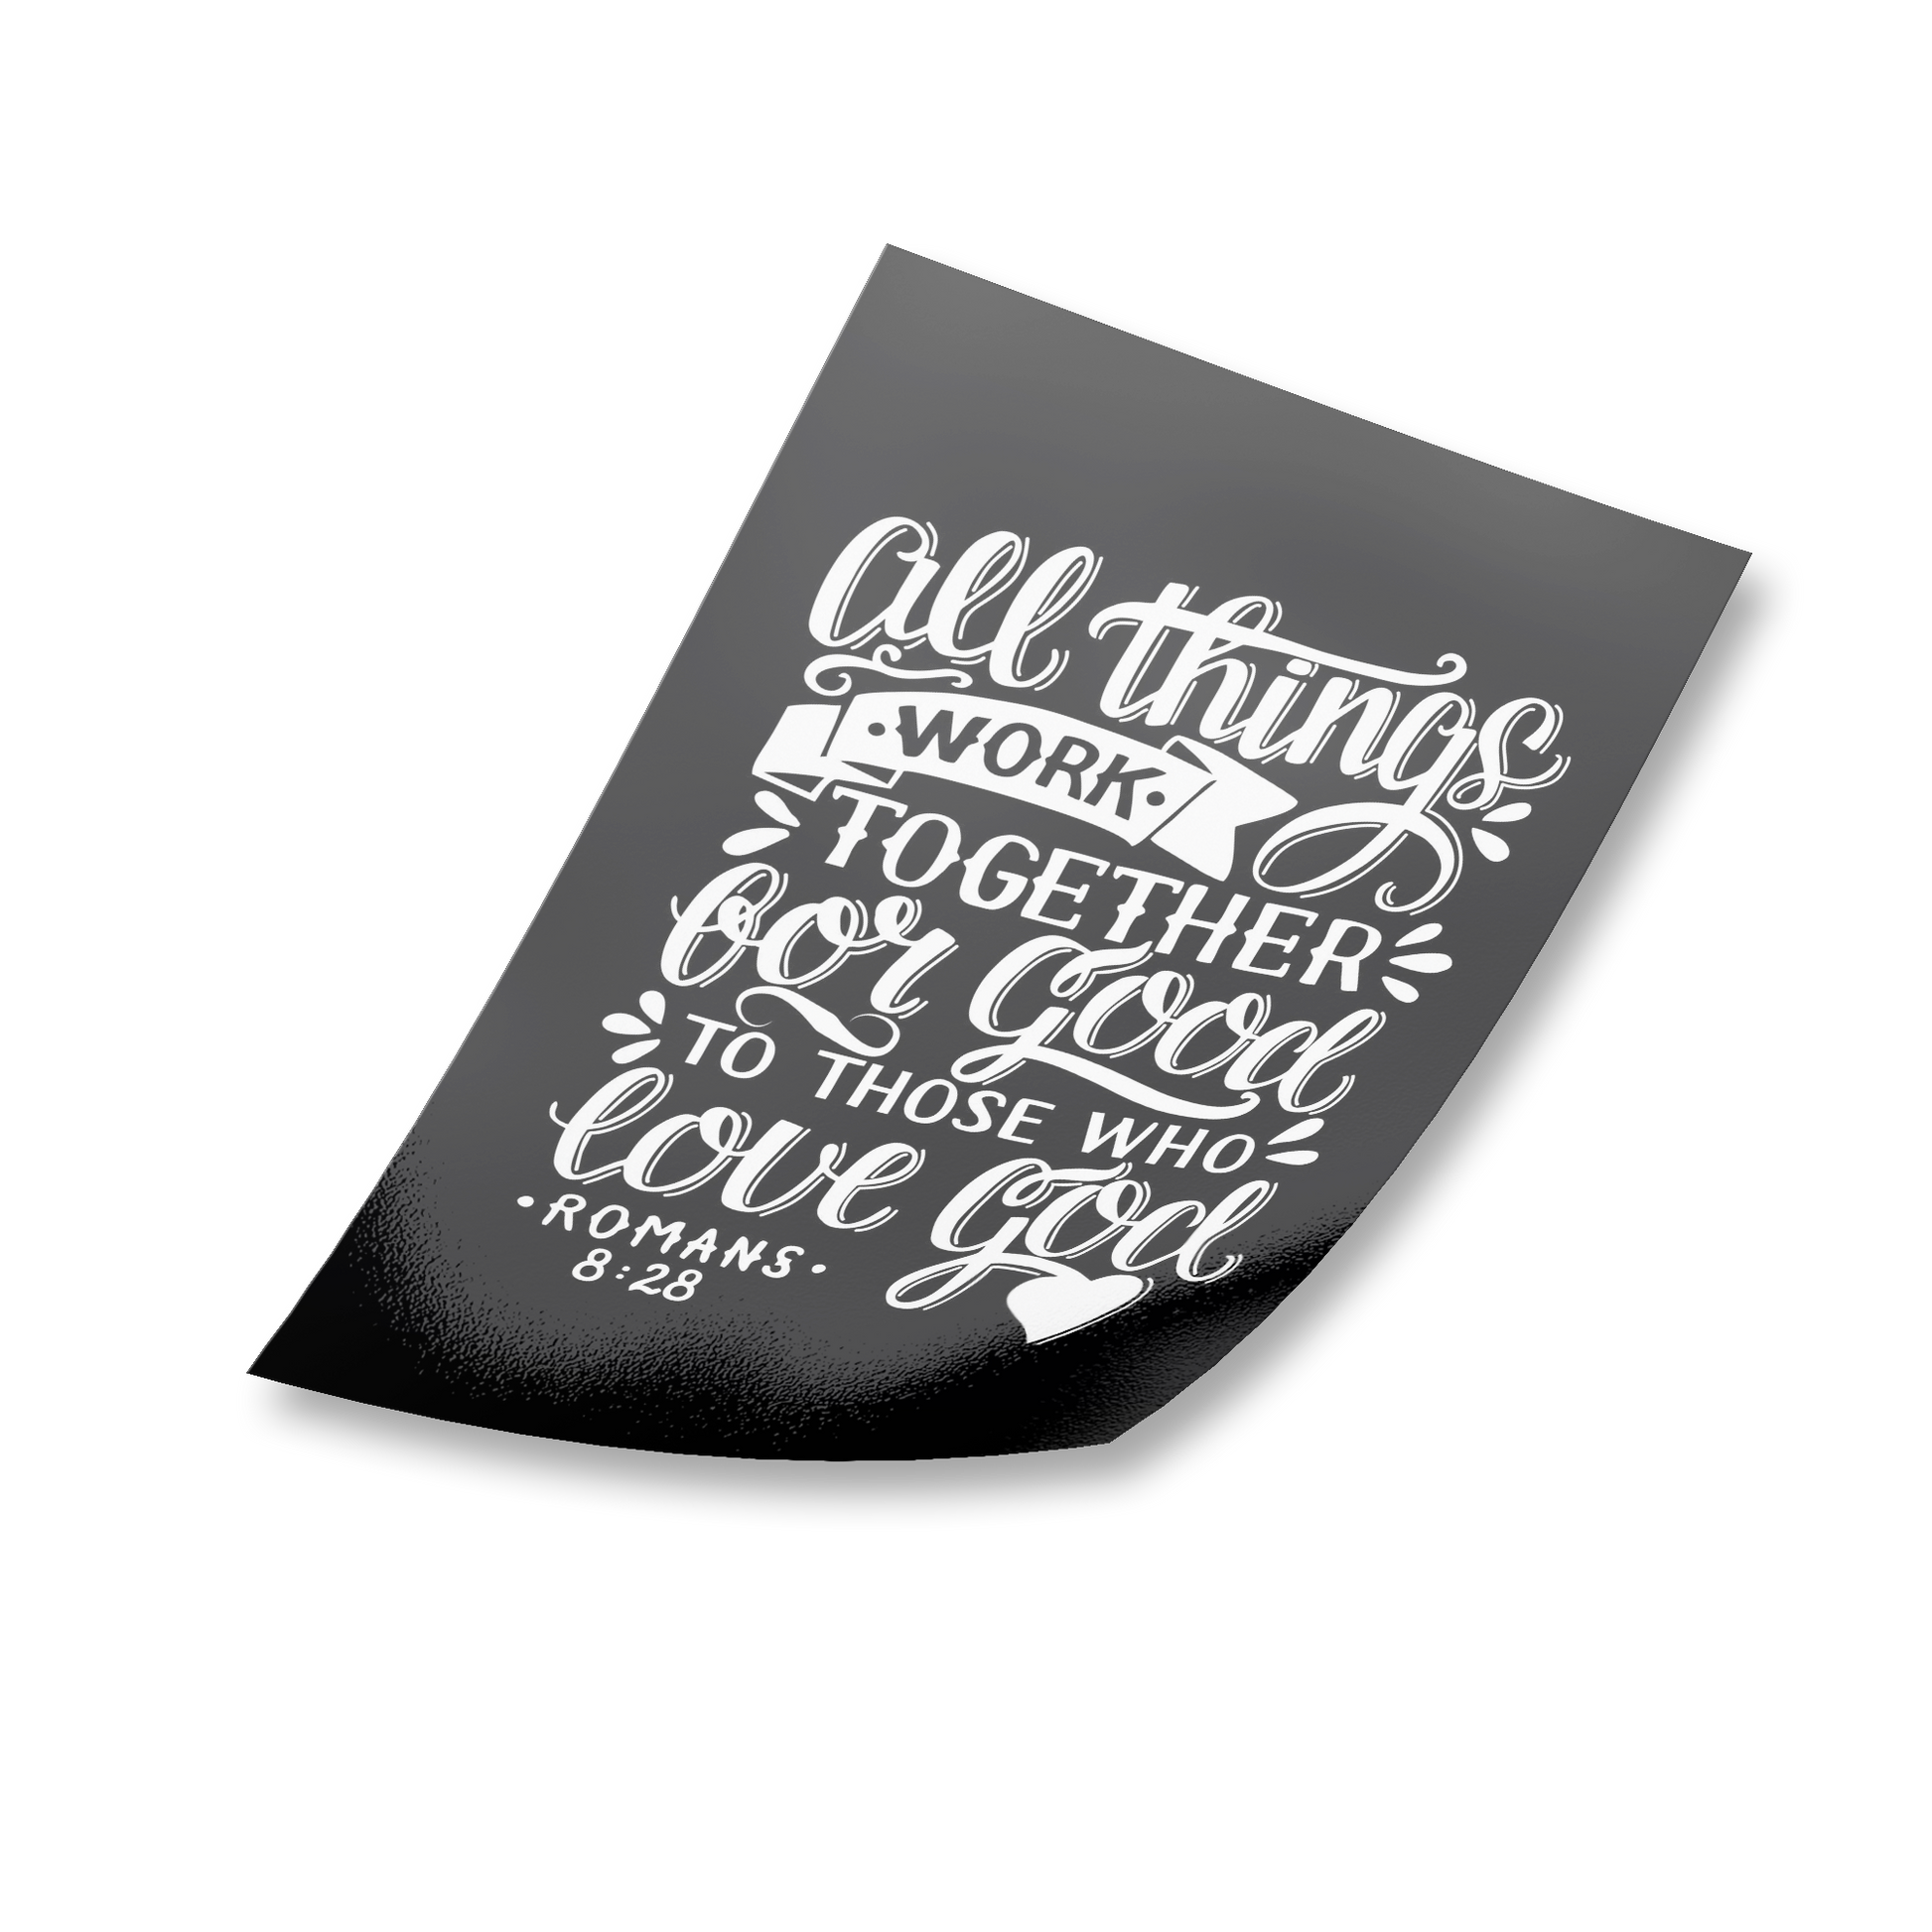 All Things Work Together For Good To Those Who Love God, Romans 8:28 - White on Black Rectangle Sticker sideways